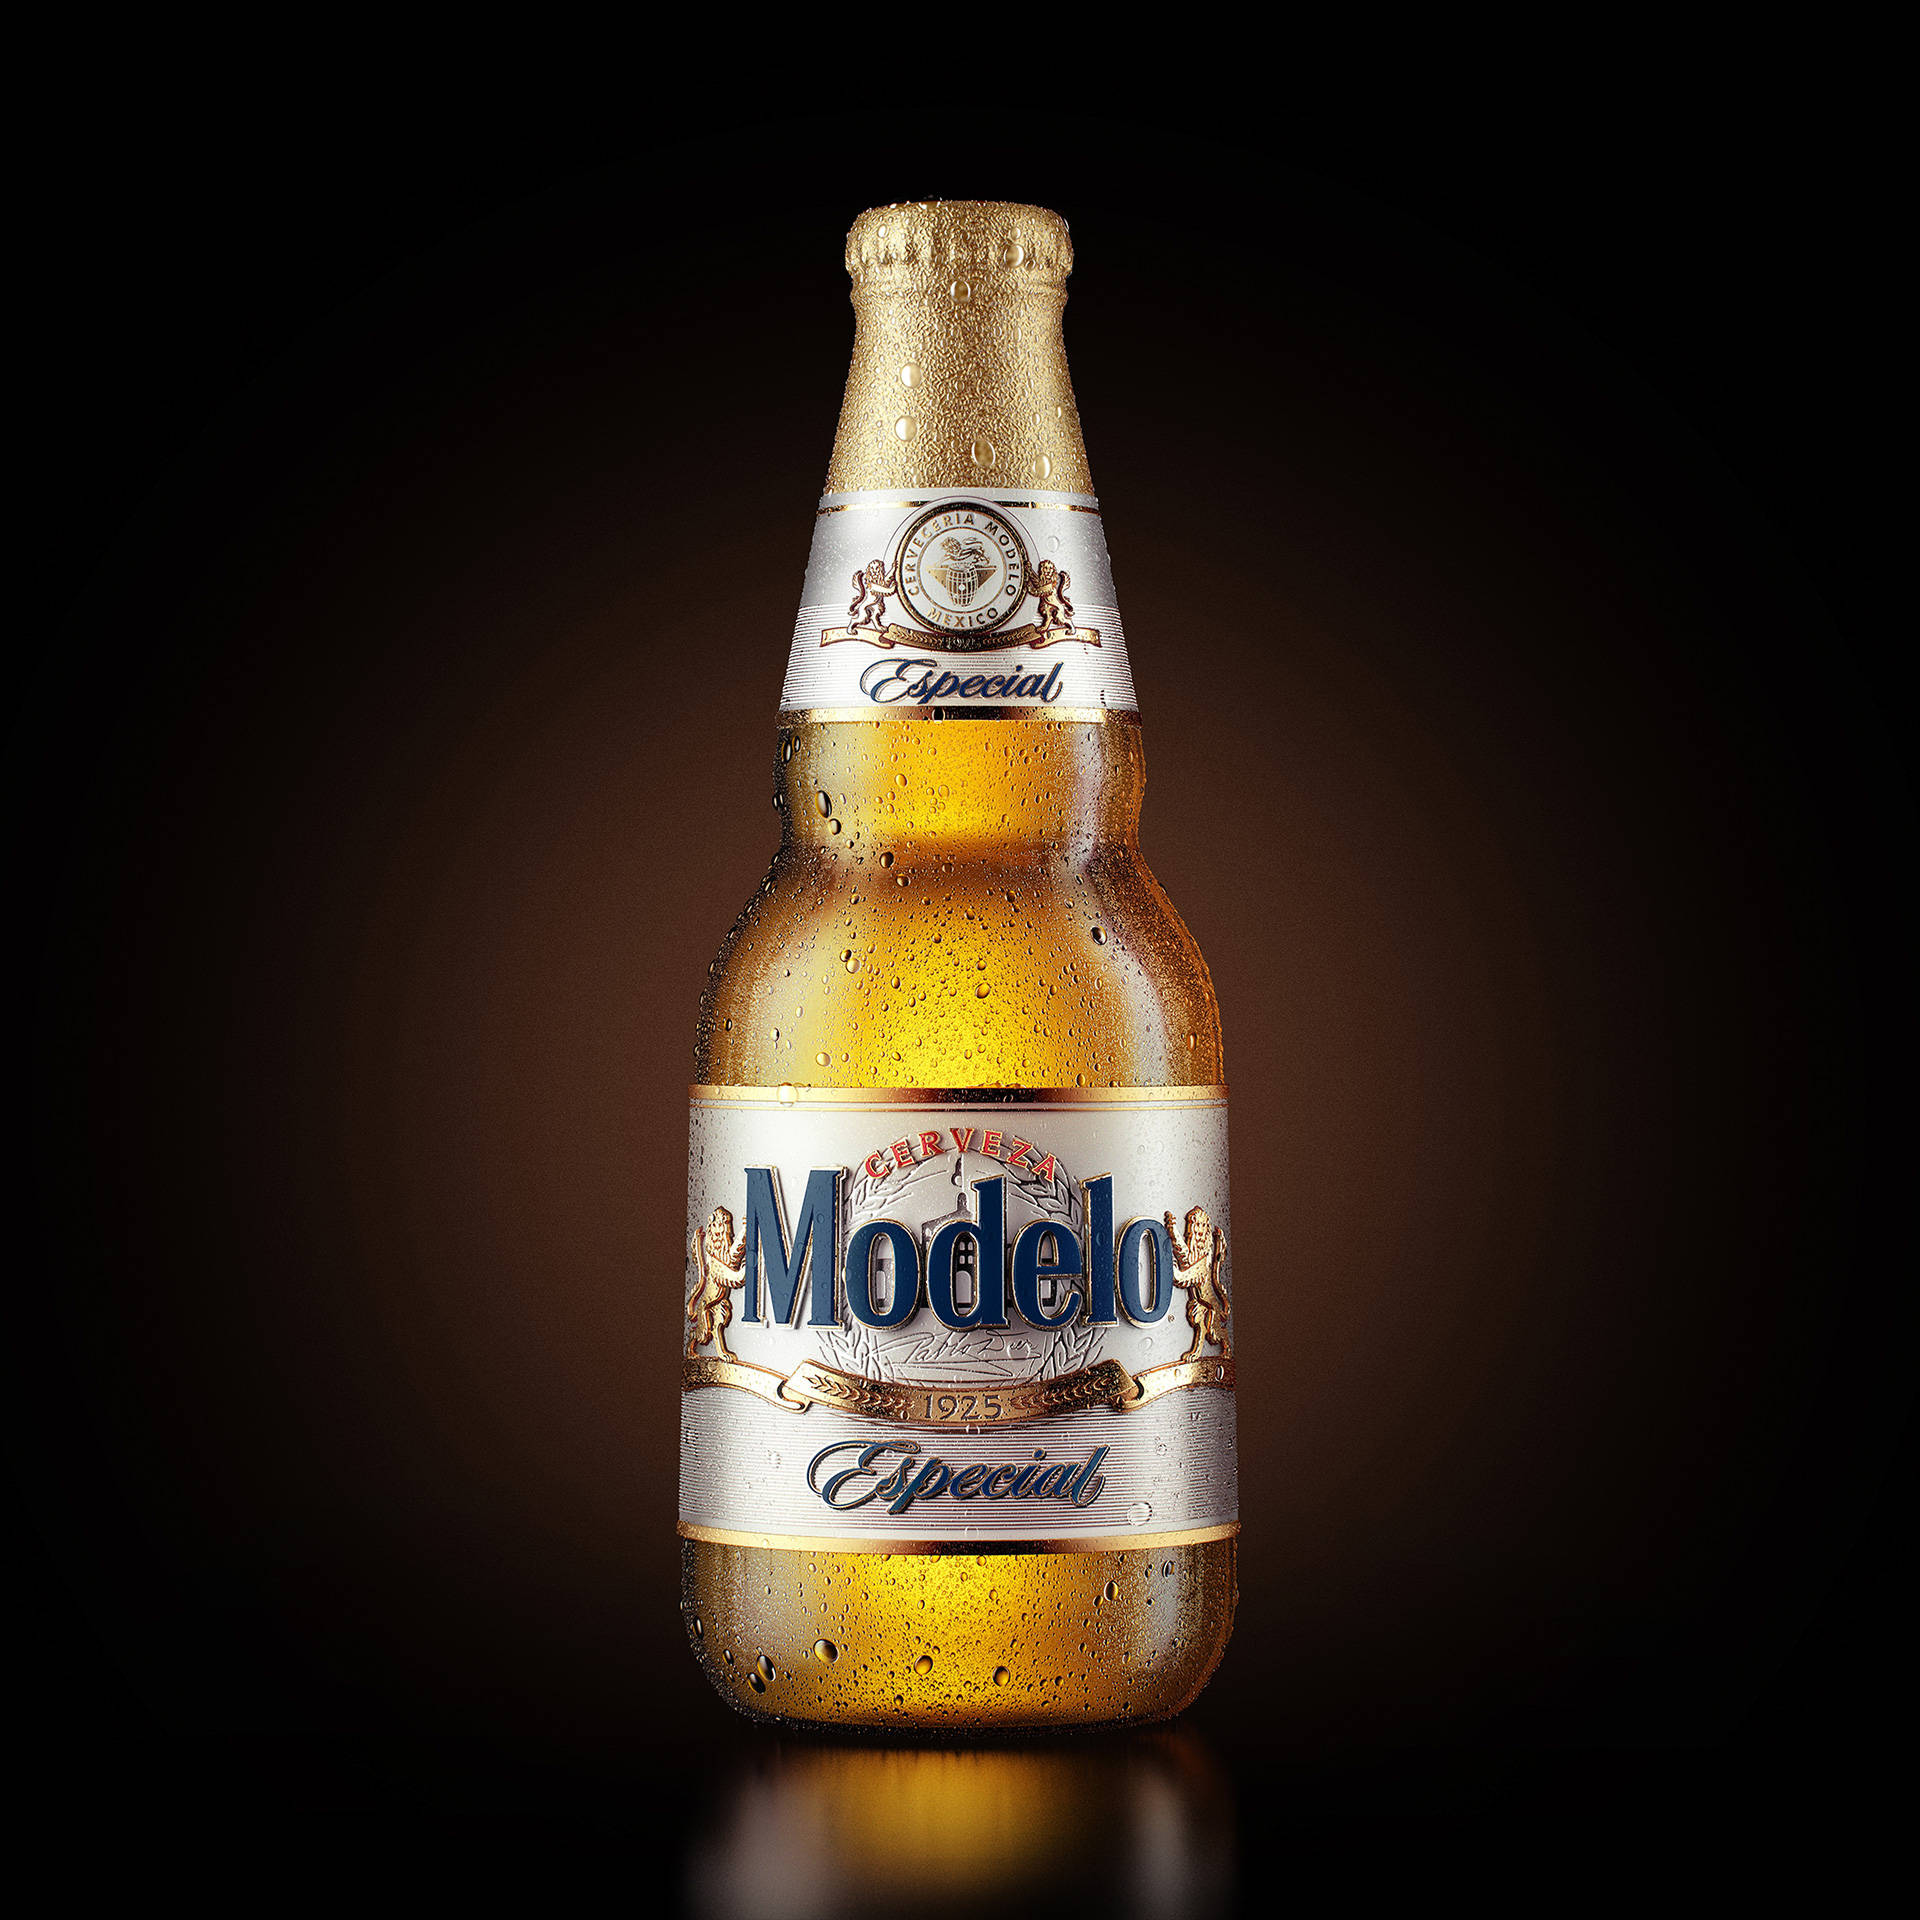 Weekend Refreshment with Modelo Especial Wallpaper